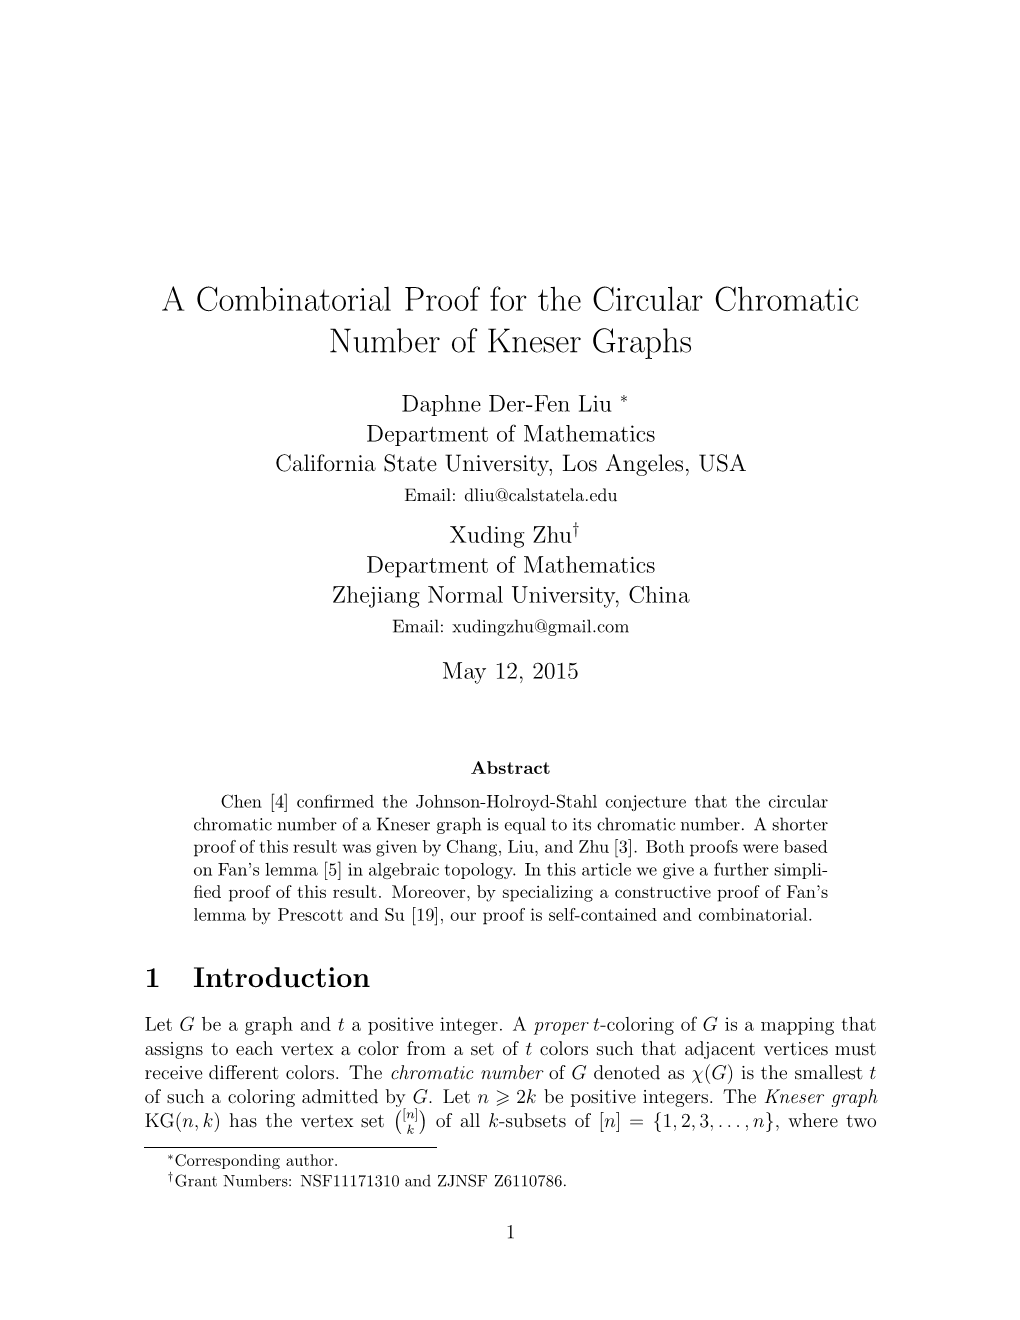 A Combinatorial Proof for the Circular Chromatic Number of Kneser Graphs